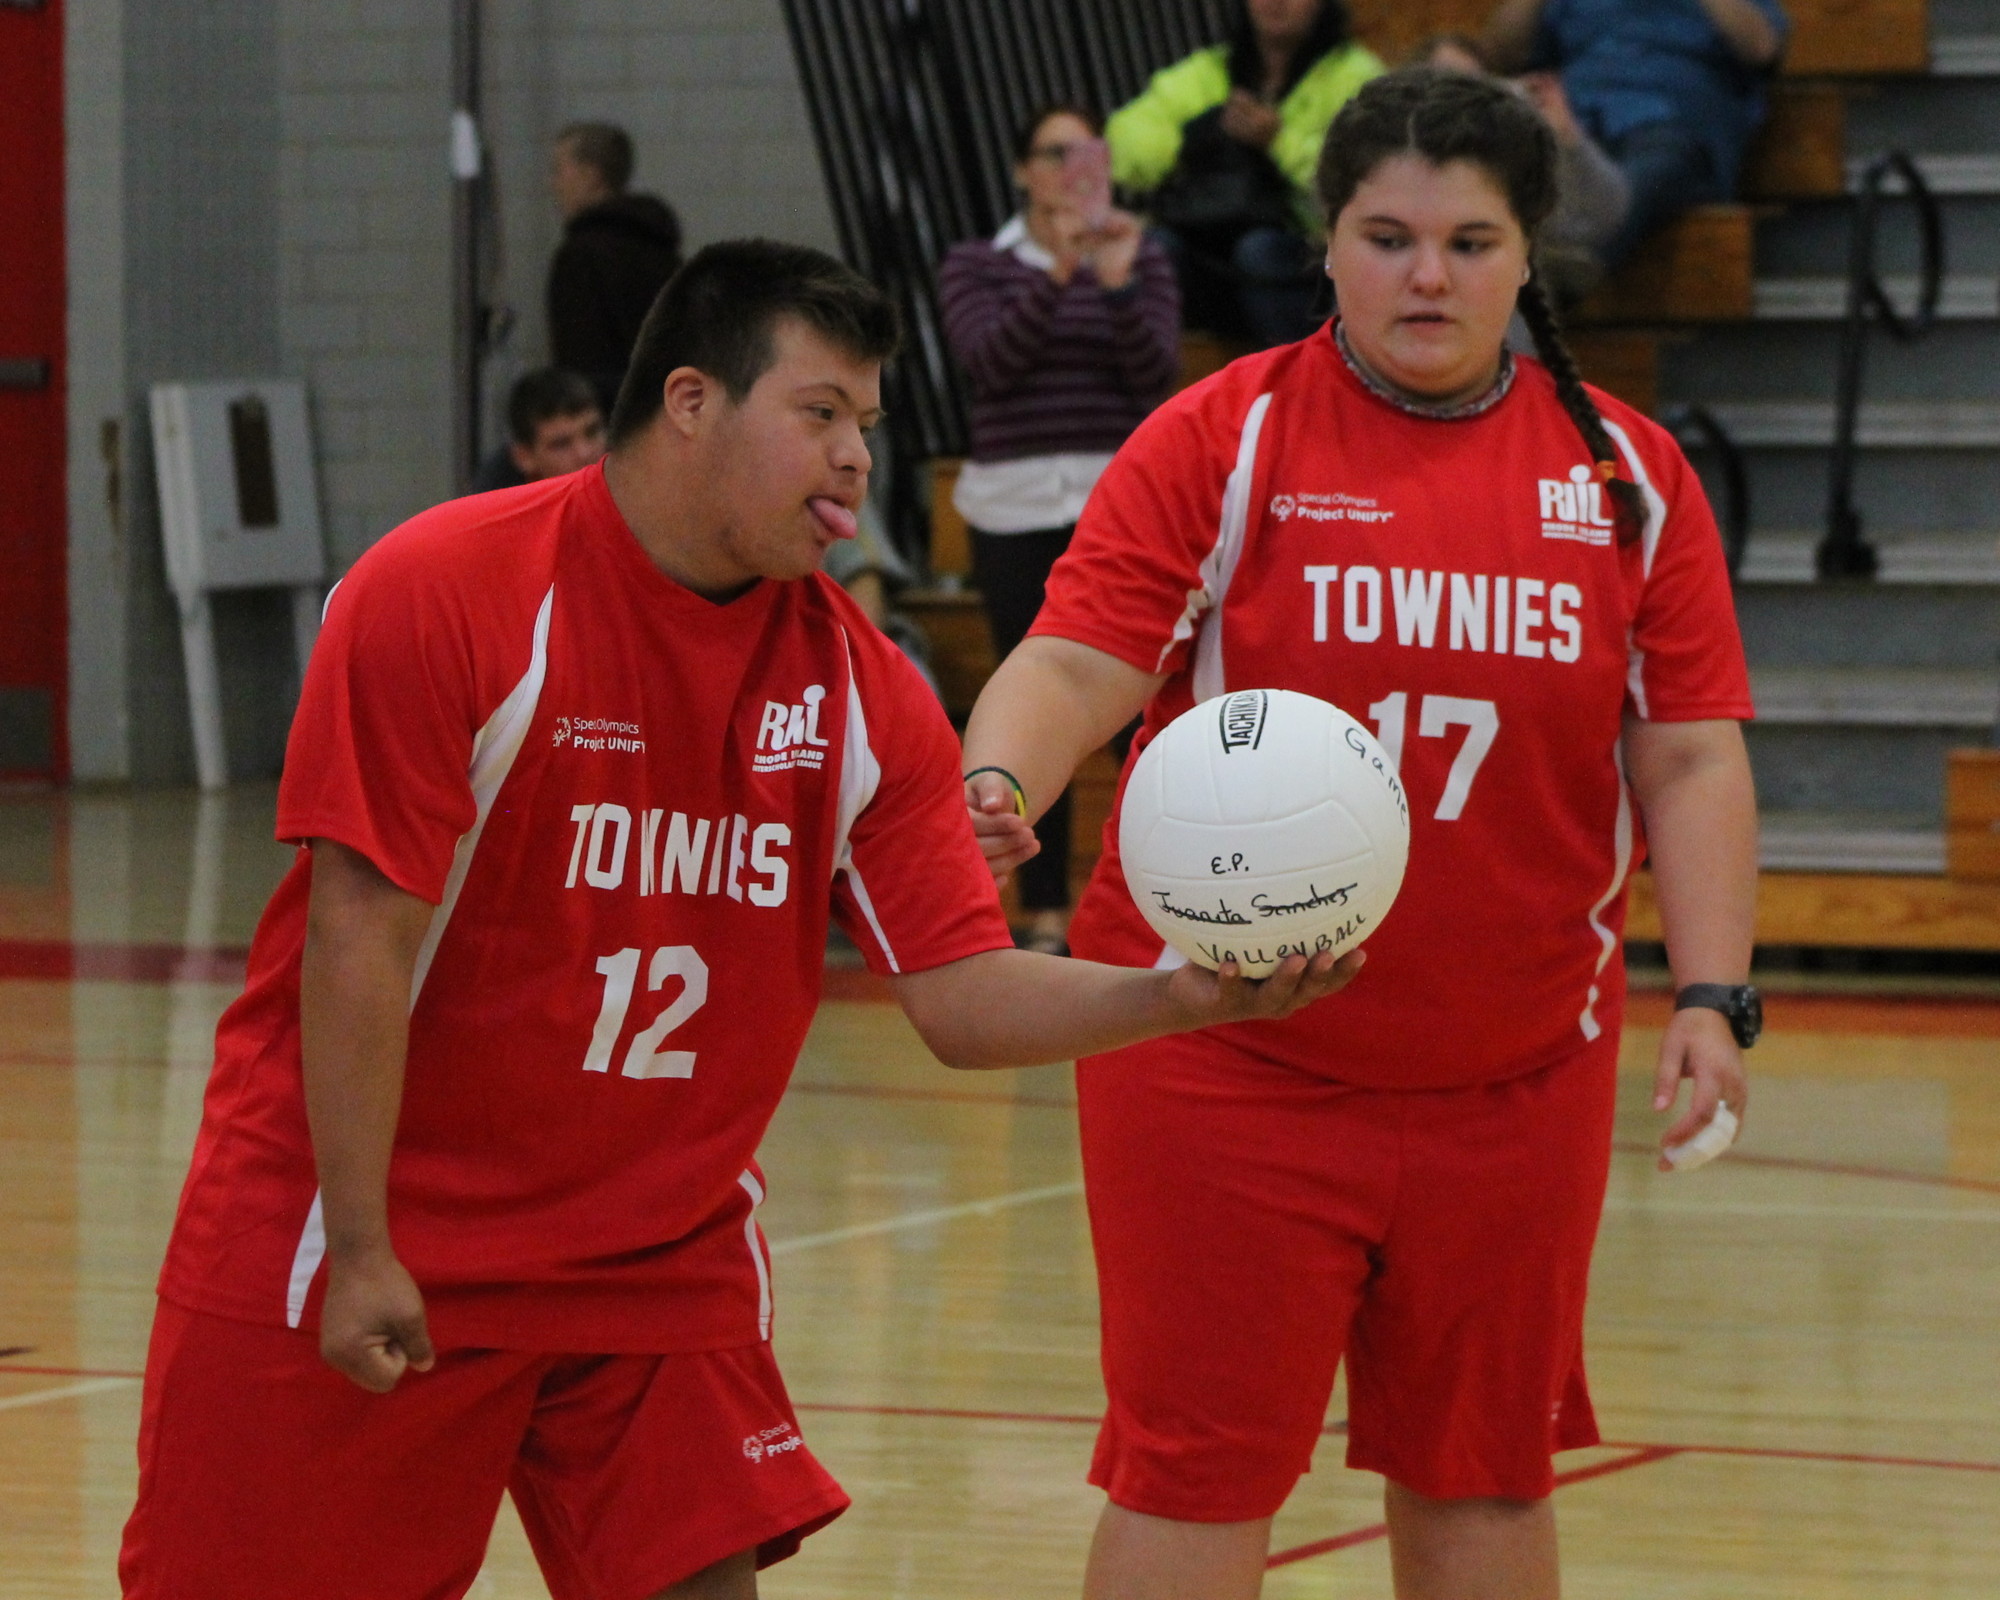 EPHS Unified Volleyball athlete Jonah Wagner readies to serve under the watchful eye of partner Tianna Delsantos.